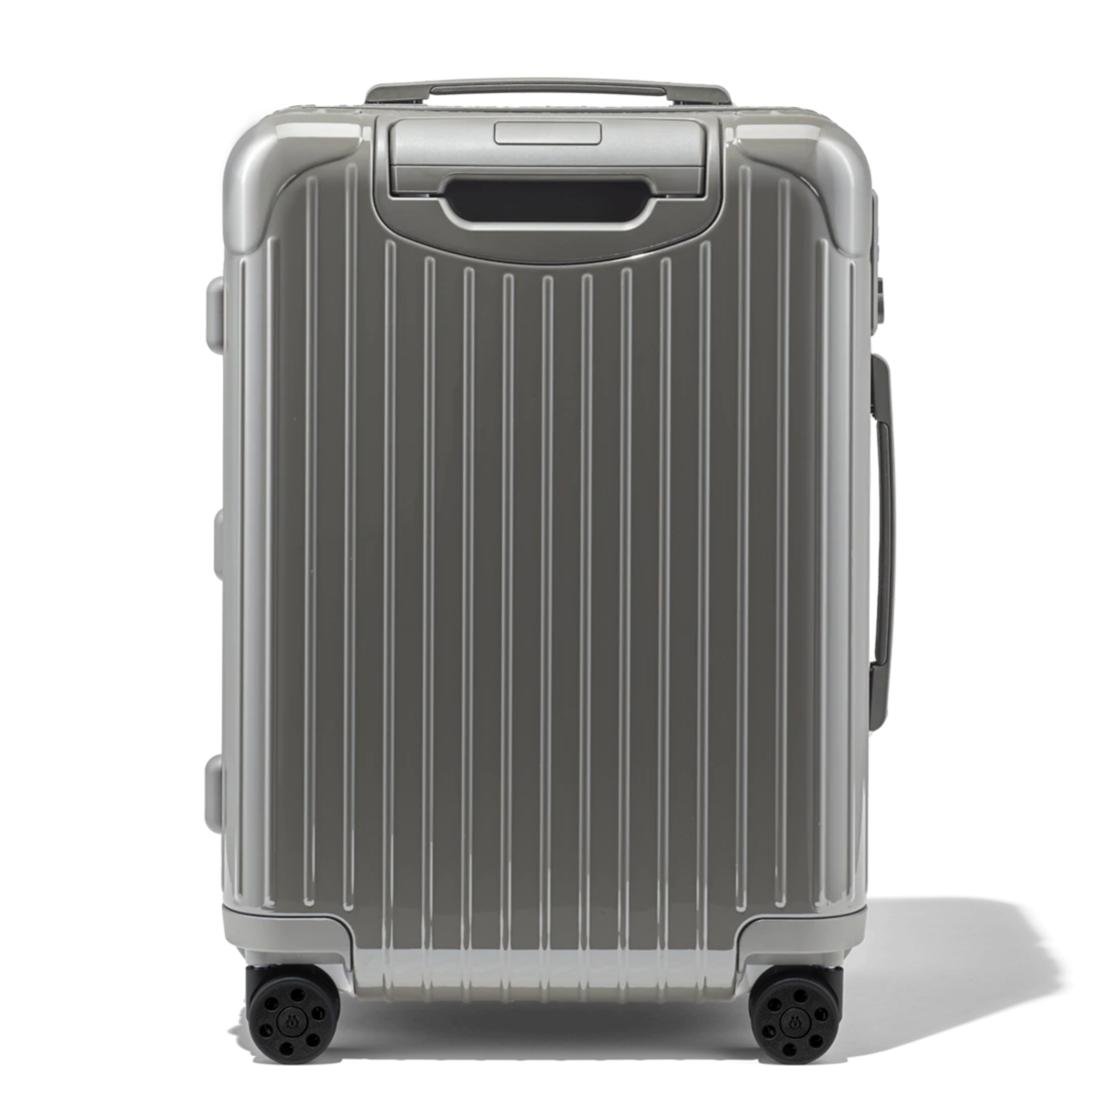 RIMOWA Essential Cabin Carry-on Suitcase in Gray